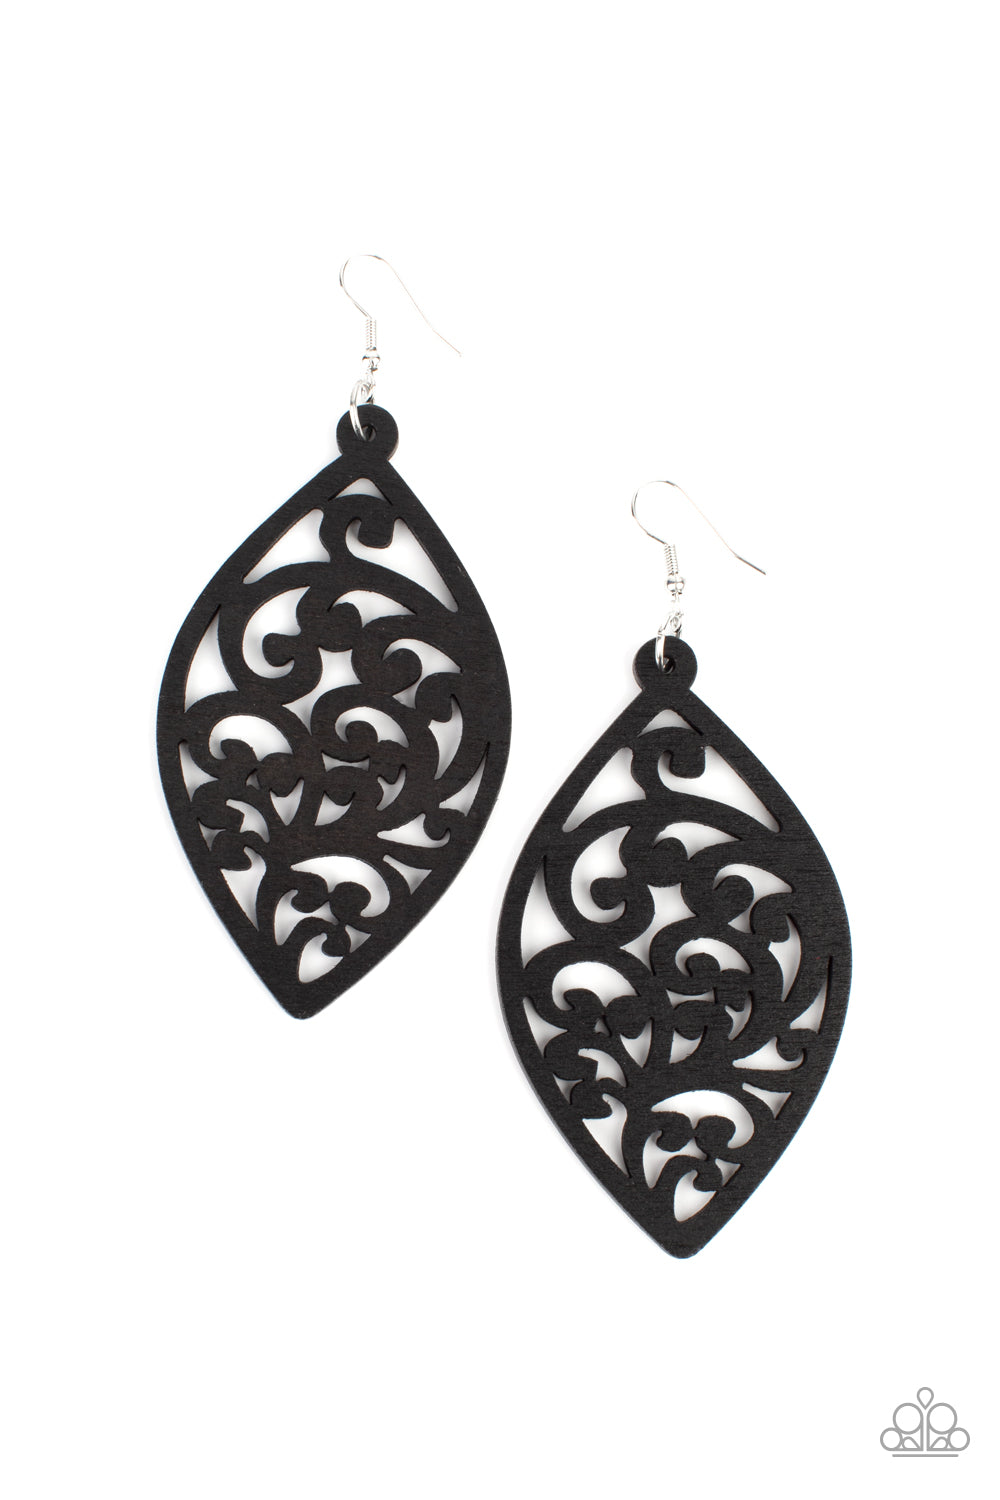 Painted in a shiny black finish, a floral motif permeates an airy oval wooden frame creating a tropical-inspired lure. Earring attaches to a standard fishhook fitting.